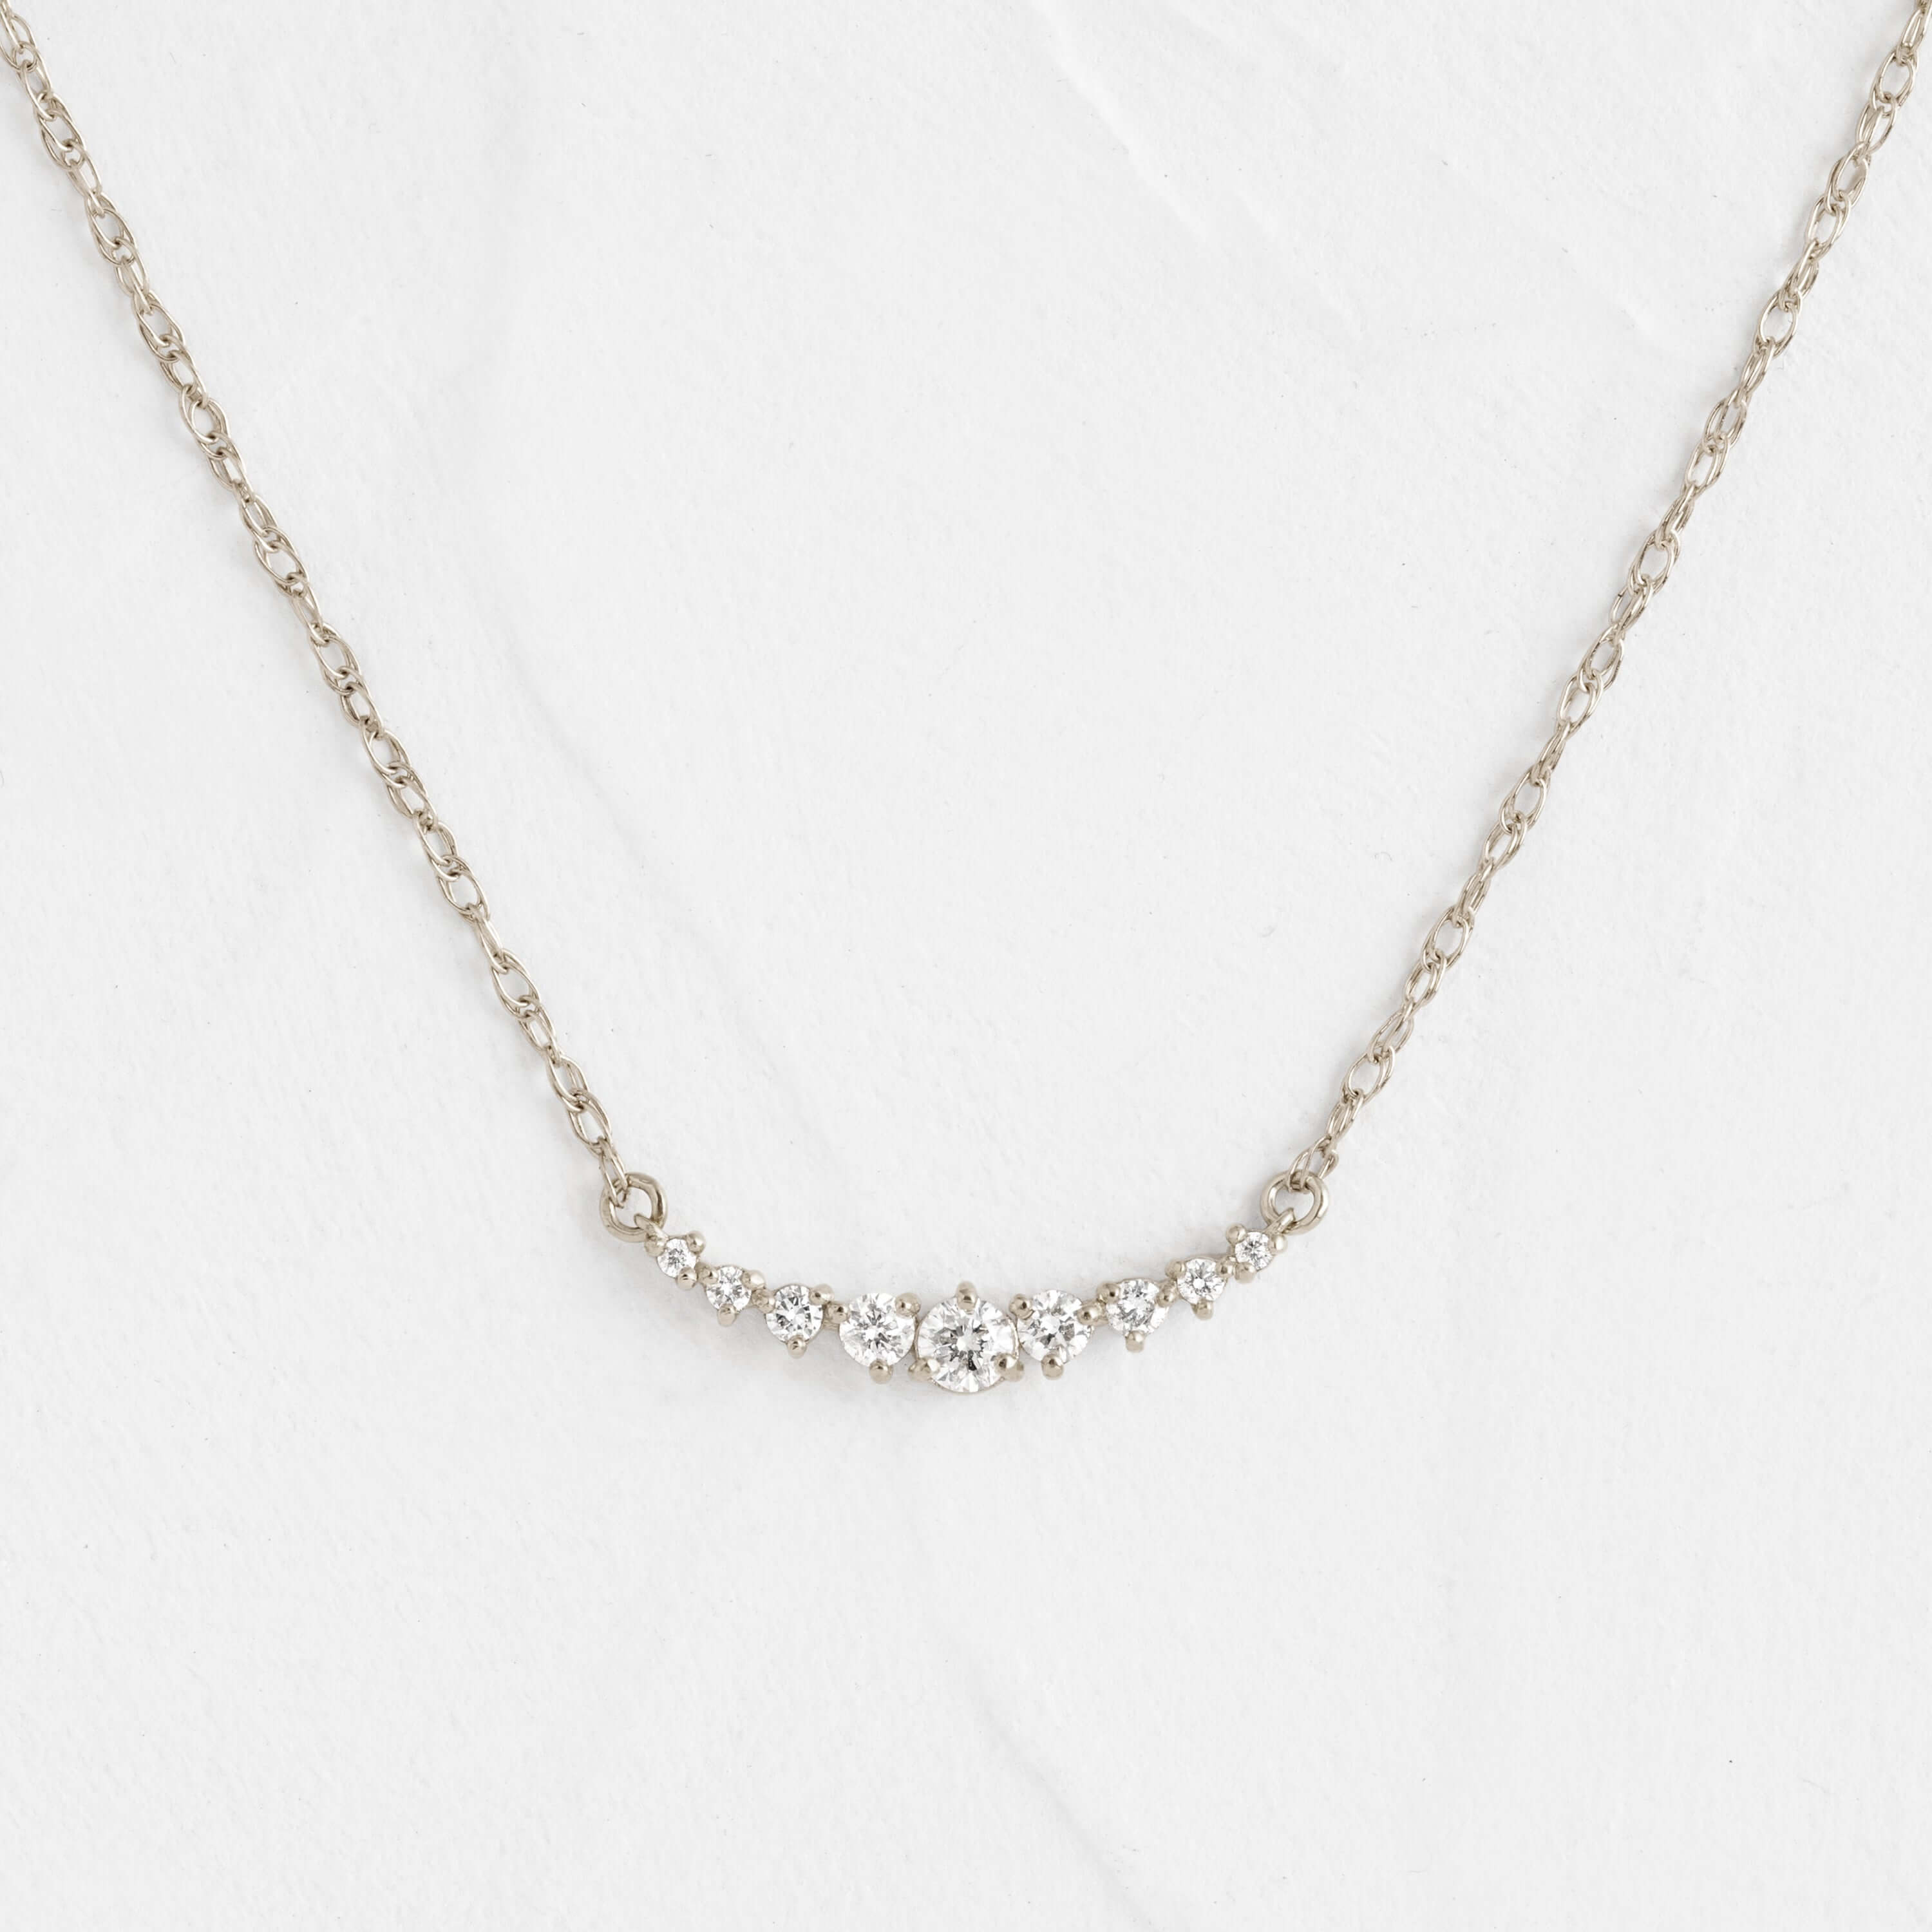 Silver Chain With Links Eyelet Chain 